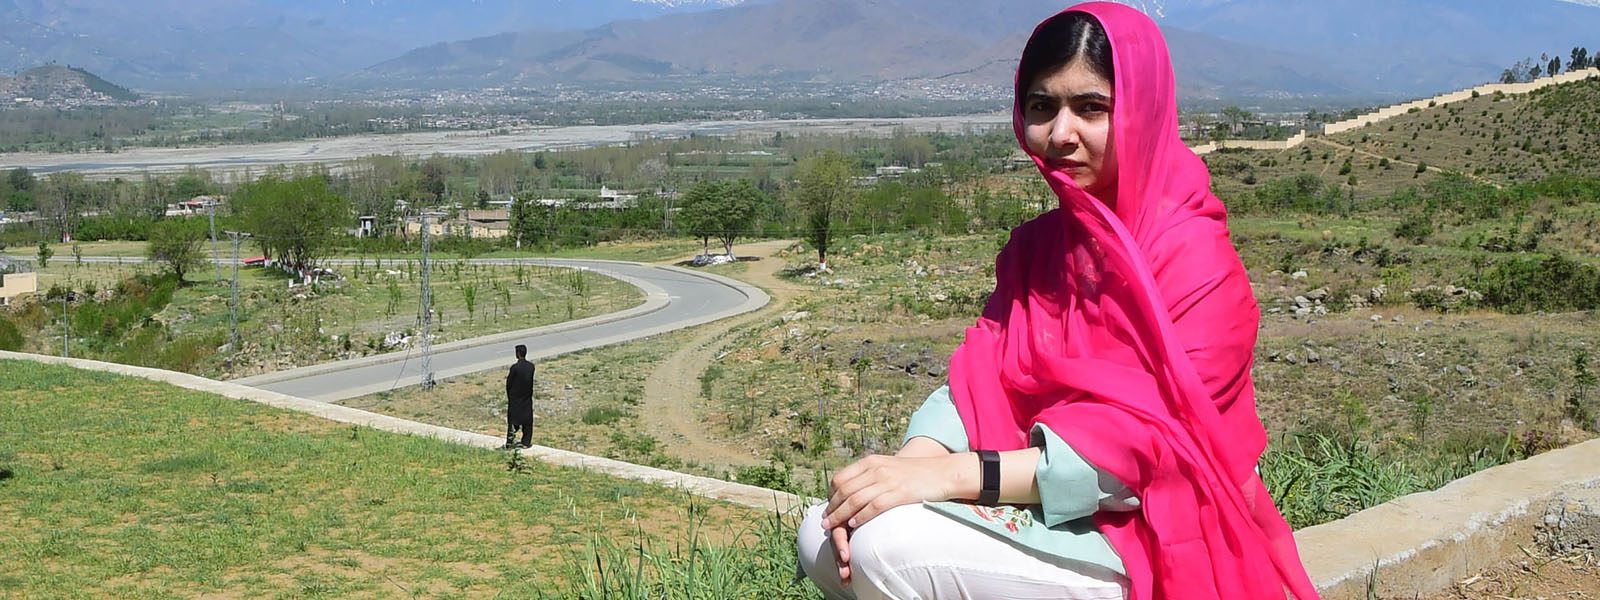 Malala's first visit to native Swat in pictures